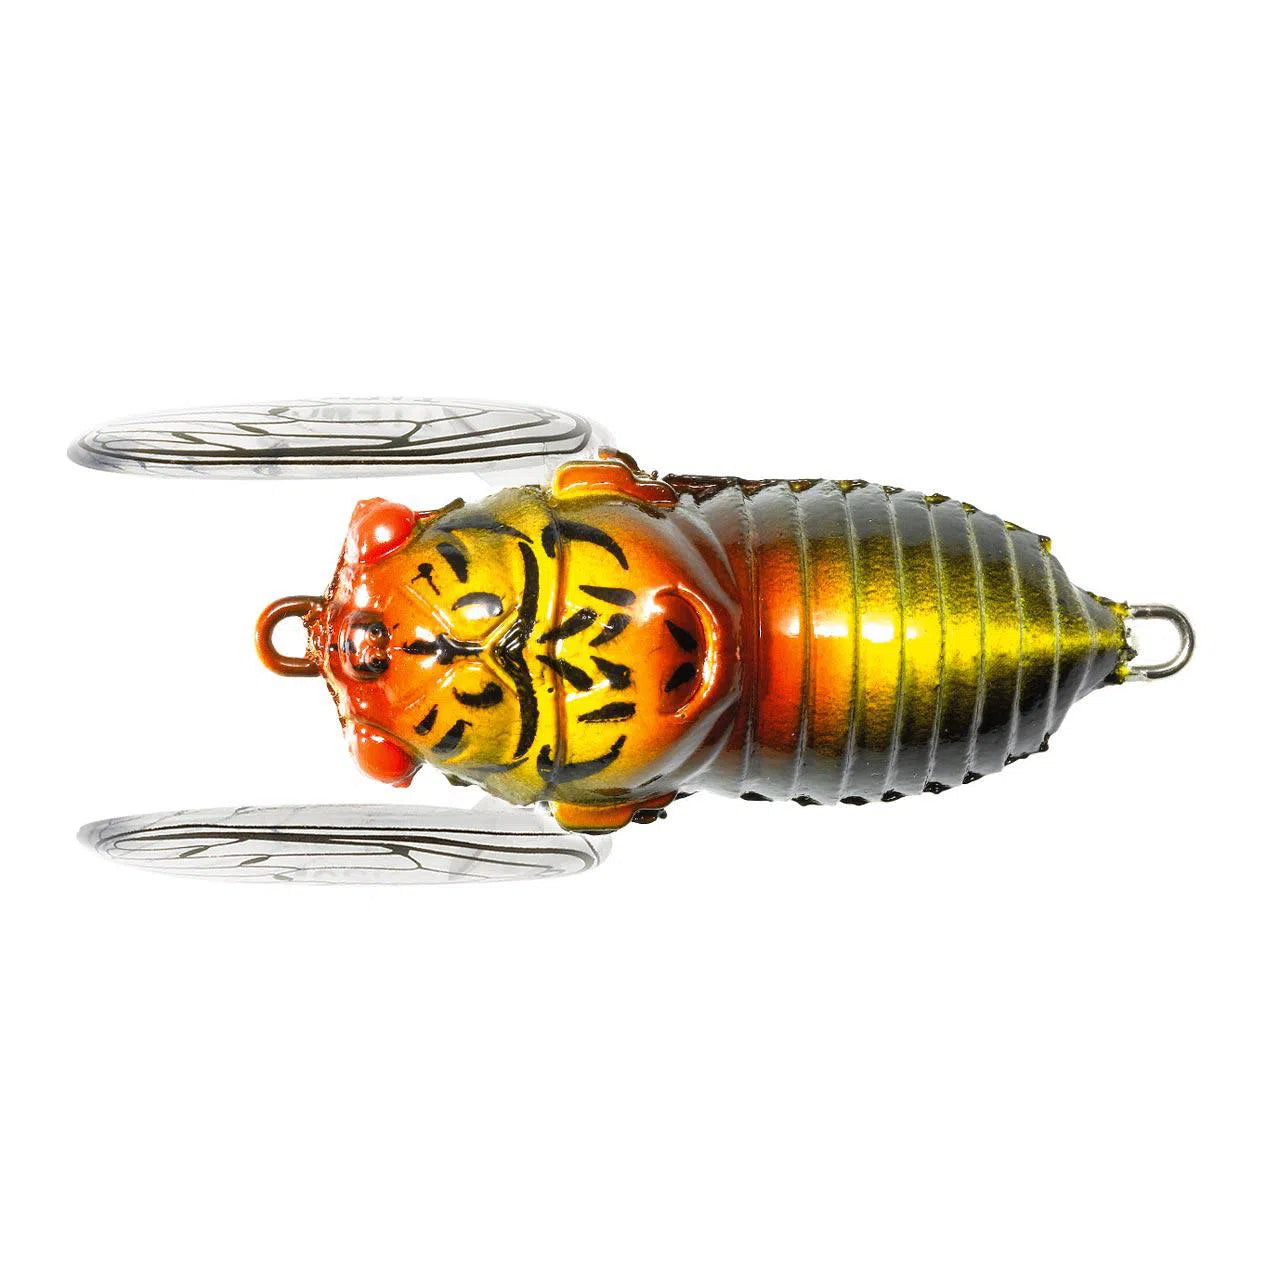 Tiemco Cicada Soft Shell Surface Lure 40mm-Lure - Small Surface-Tiemco-182-Fishing Station